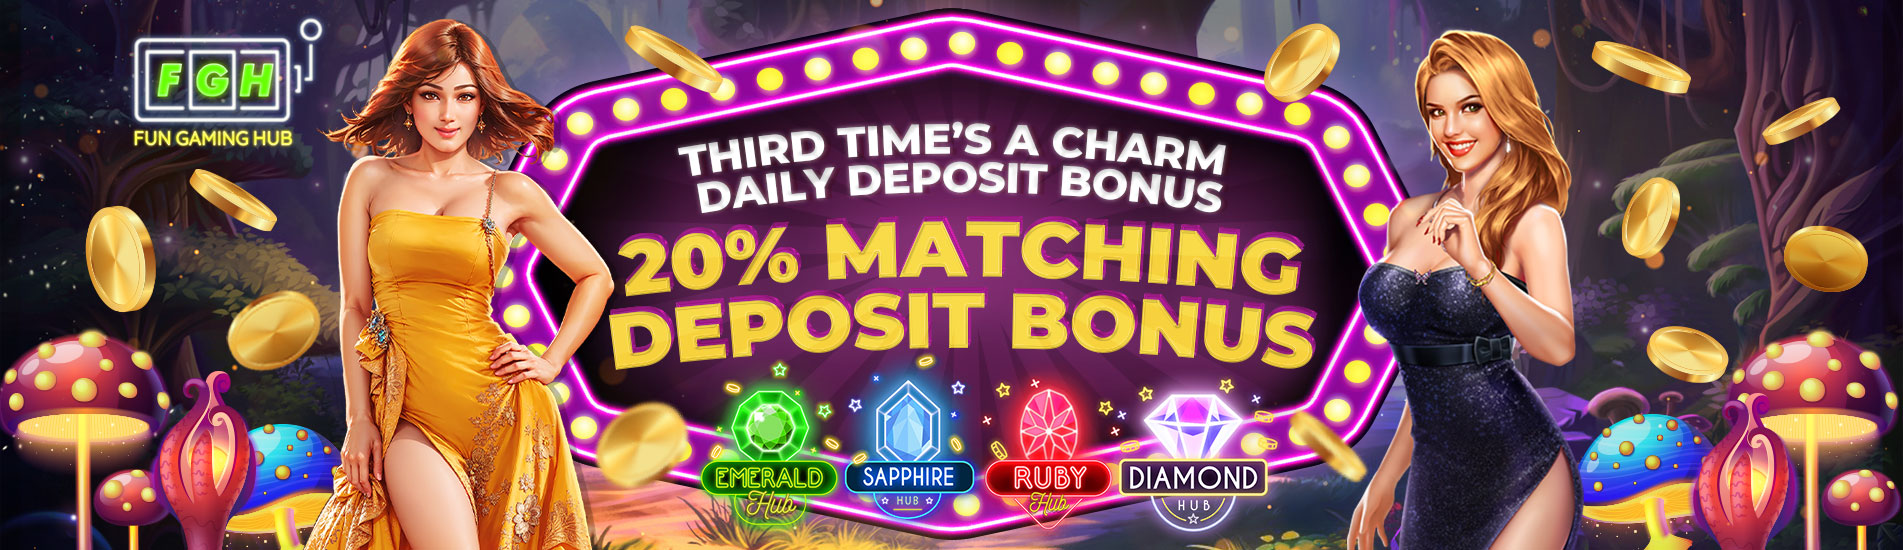 Third Time Charm Daily Deposit